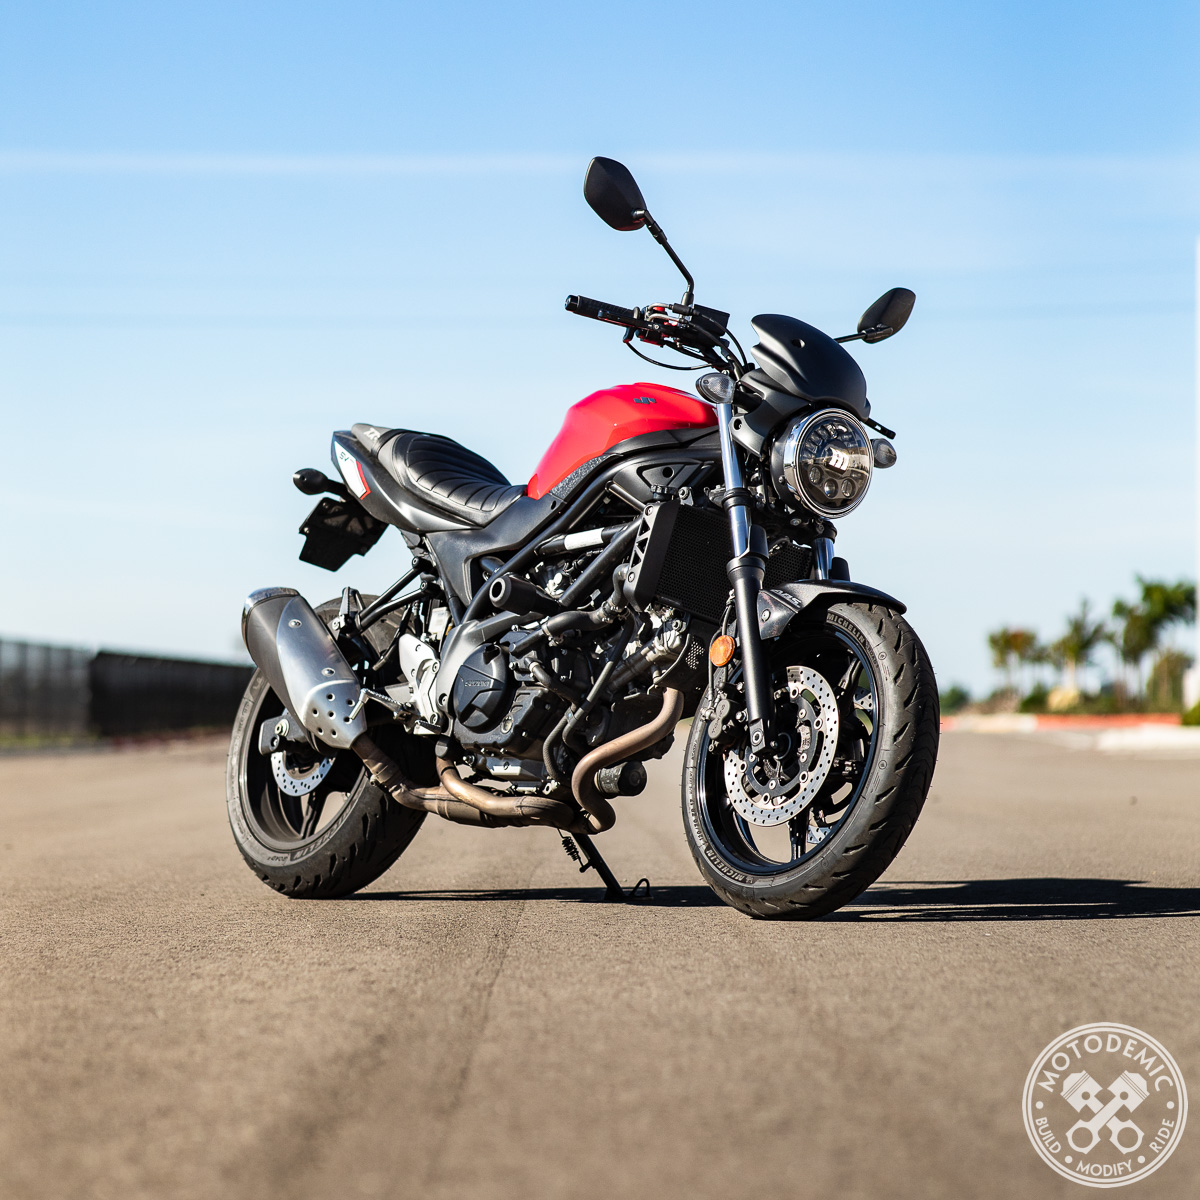 New to me Bike: SV650 | South Bay Riders